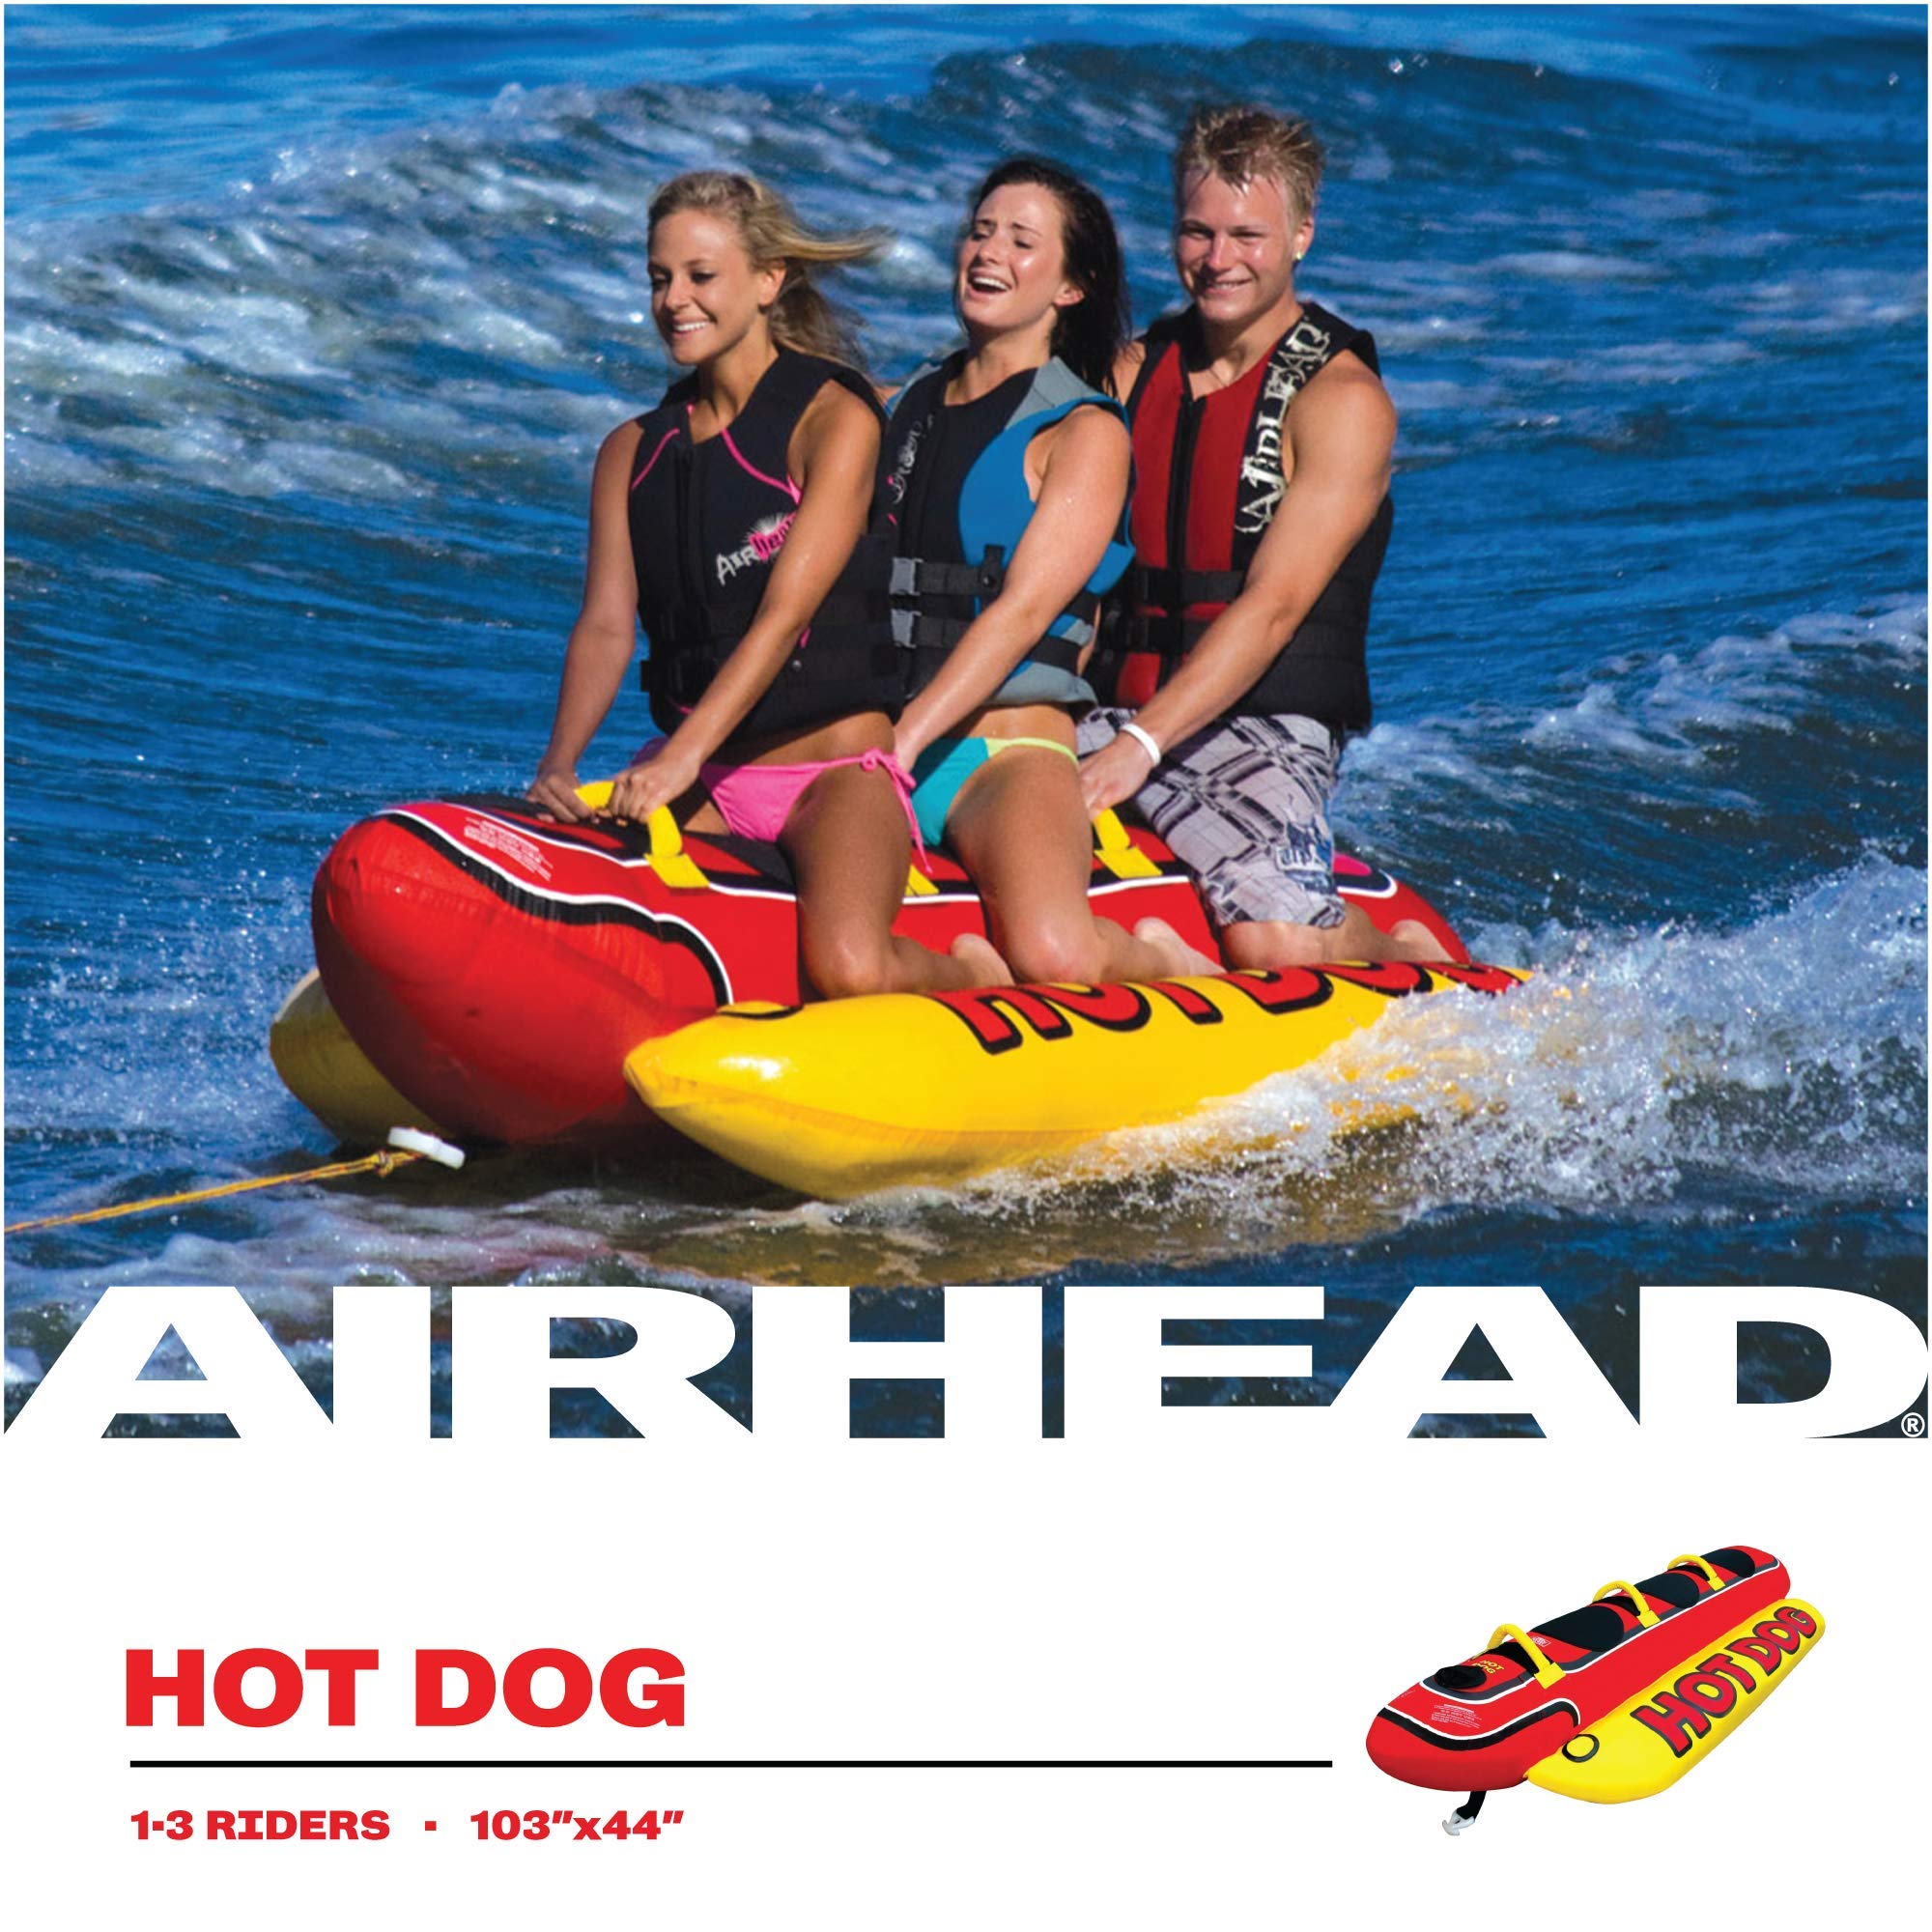 Airhead Hot Dog Towable | 1-3 Rider Tube for boating and Water Sports, Neoprene Seat Pads, Double-Stitched Full Nylon Cover, and Boston Valve for Convenient Inflating & Deflating